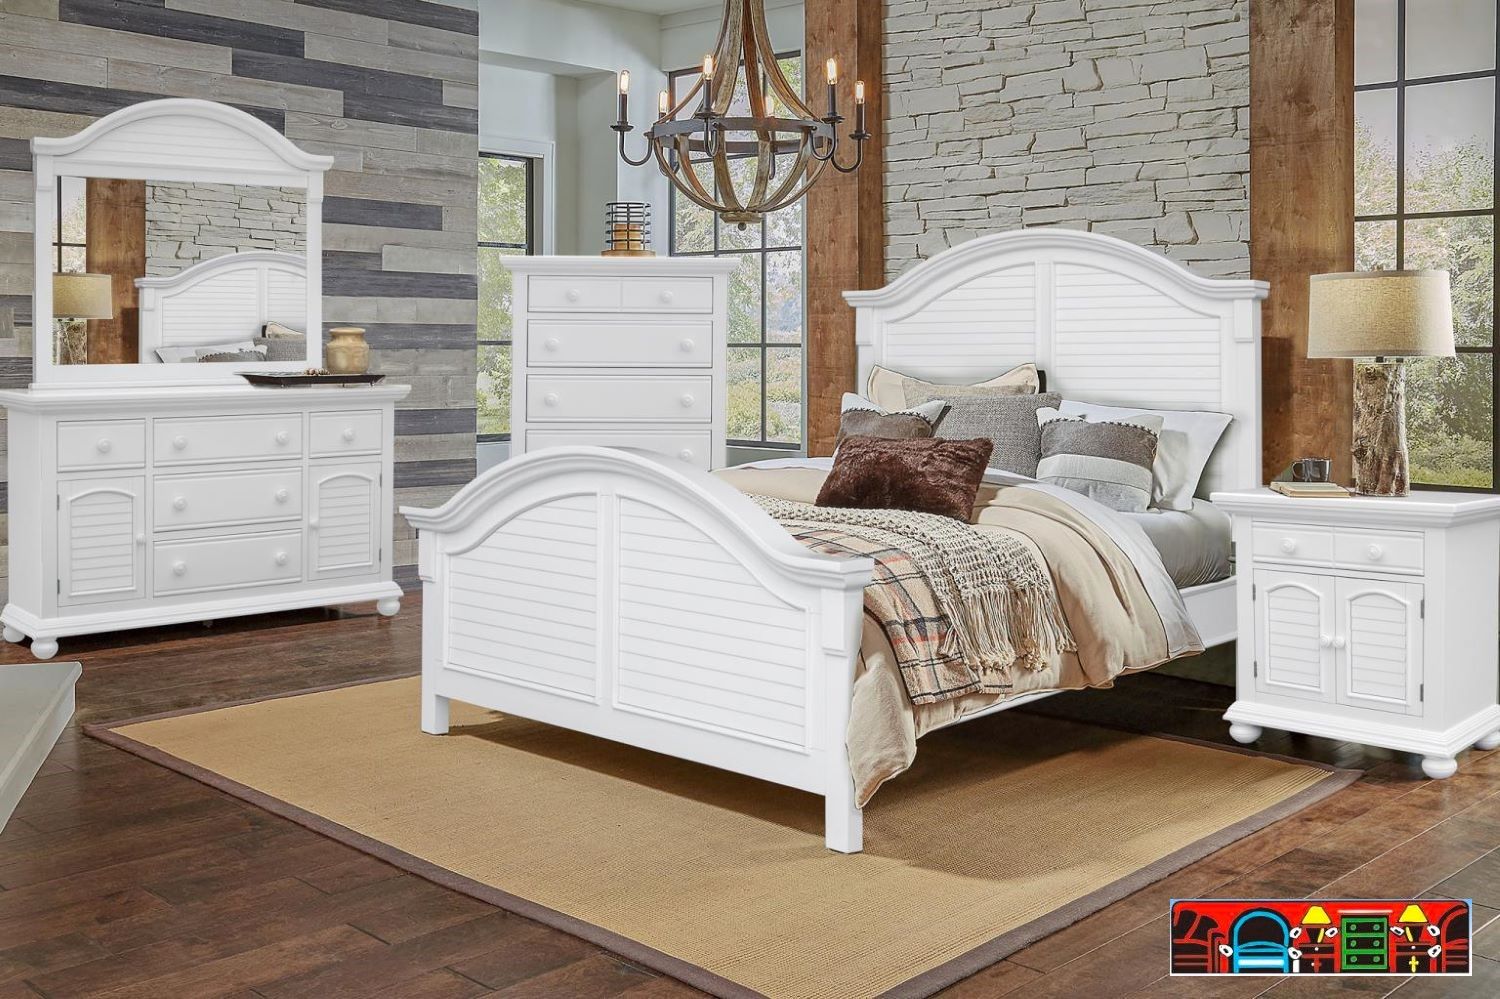 Cape Cod bedroom set in solid wood, featuring white finish with louver accents and an arched bed.